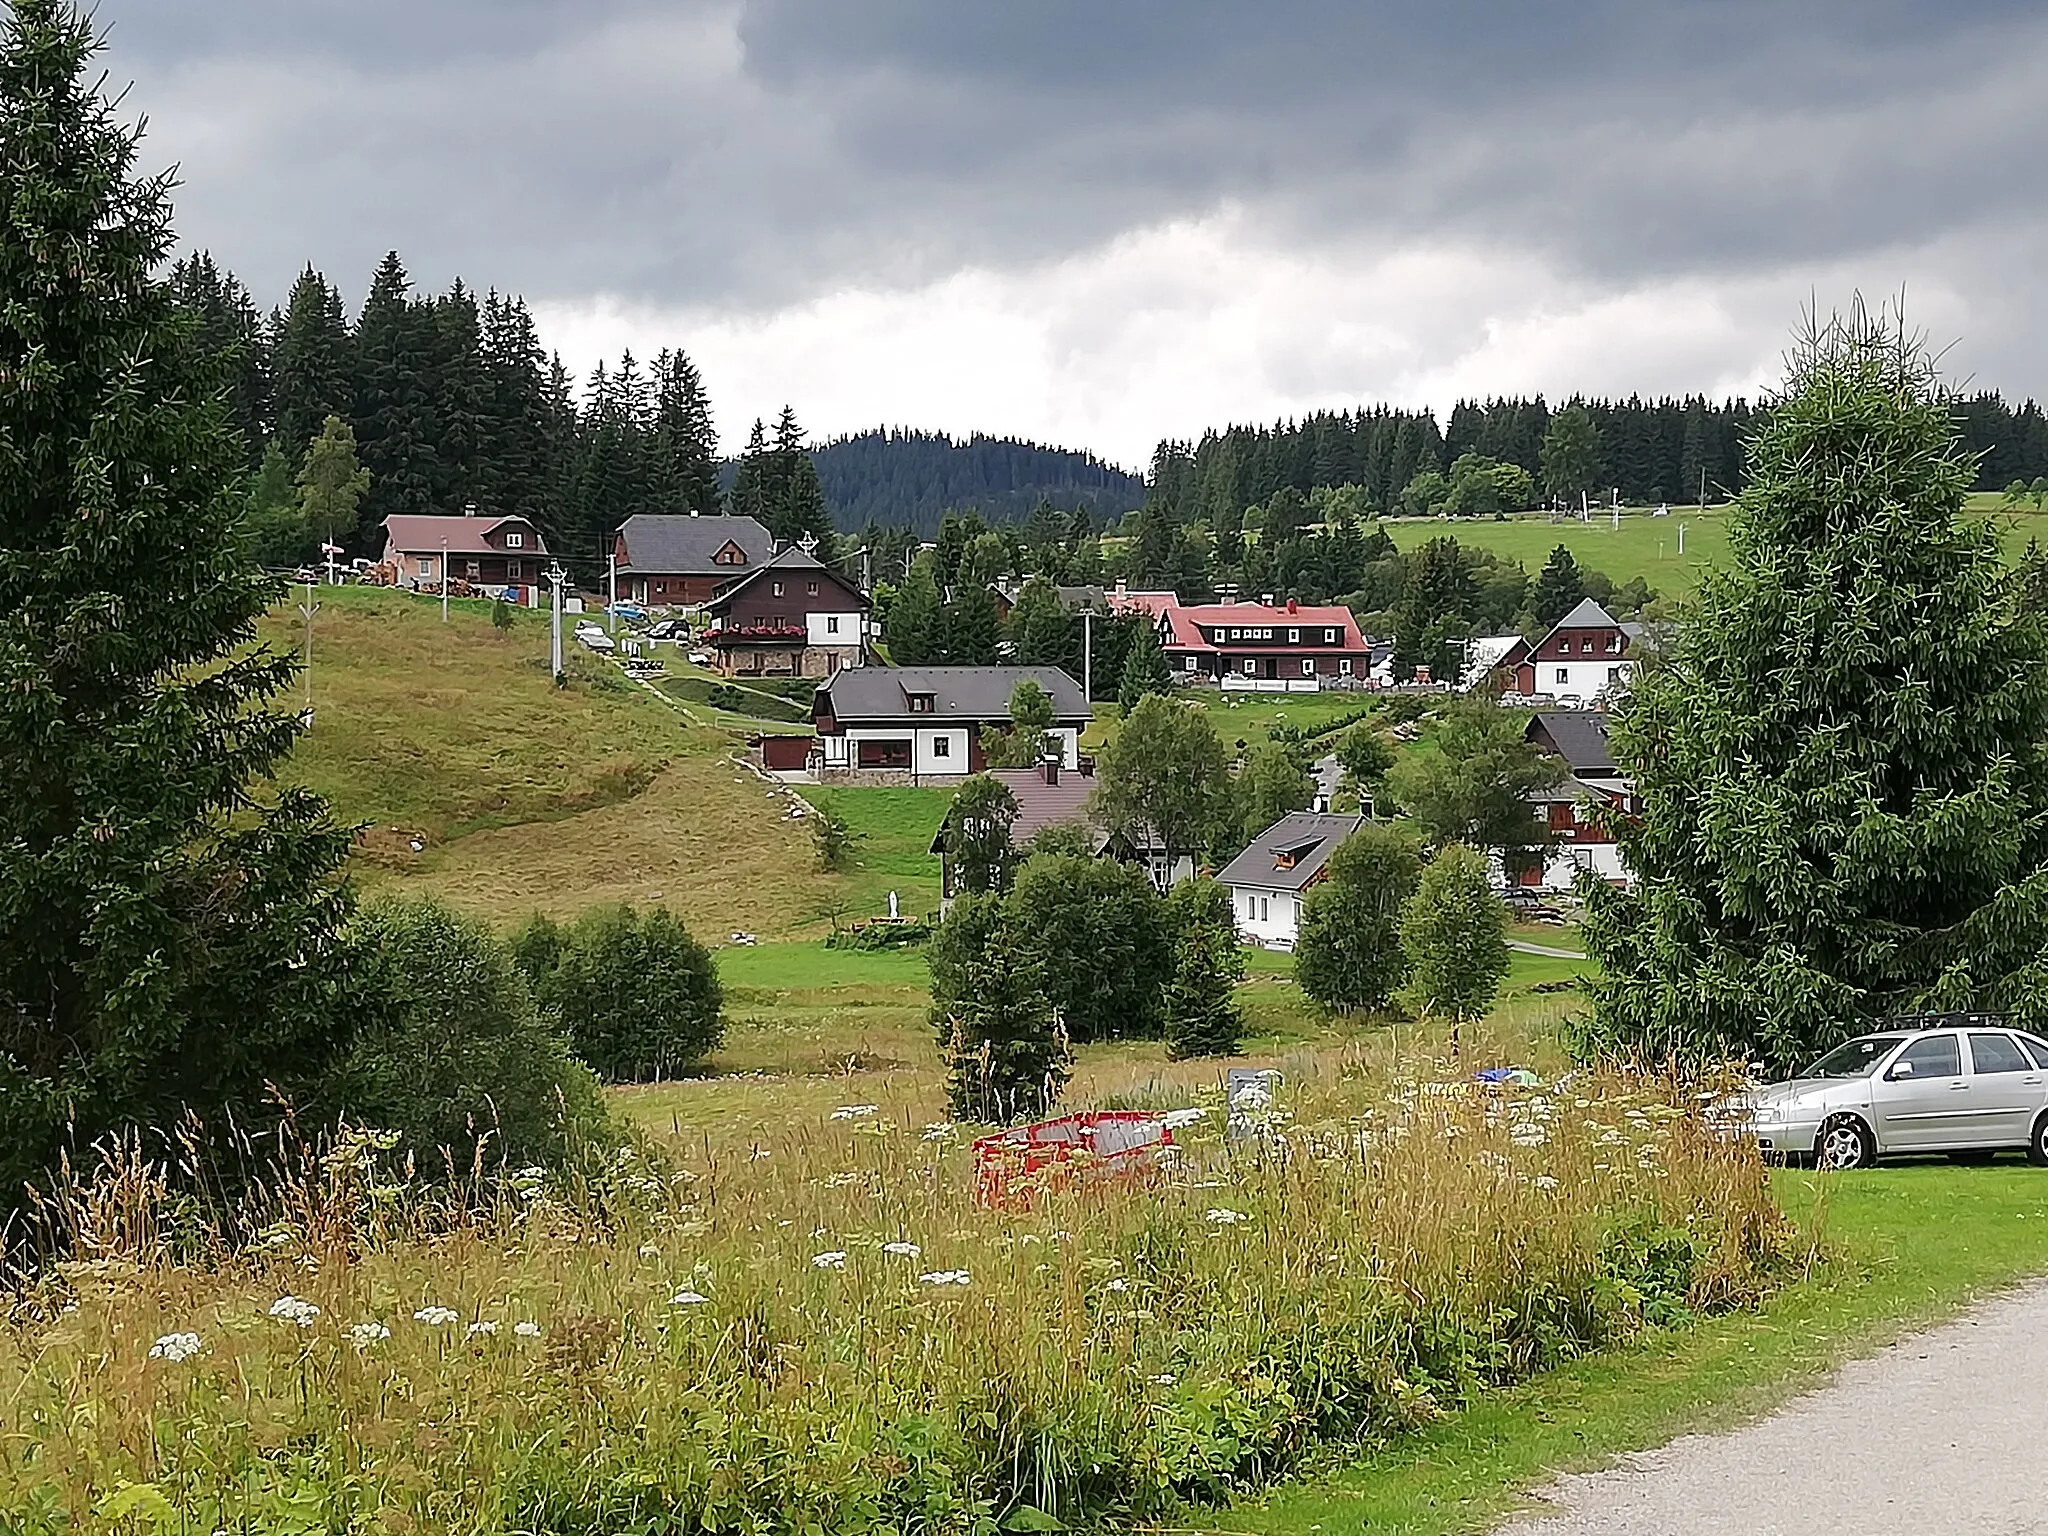 Photo showing: „Hamers houses“ (Hamerské domky) is a part of village Kvilda (Šumava, Czech republic). It is located on the right bank of the Warm Vltava River, in the southern part of Kvilda, about 600 meters as the crow flies from St. Stephen's Church (center of the village). „Hamers houses“ (Hamerské domky) are situated at an altitude of approximately 1050 m and are located in an imaginary triangle formed by two roads: the Kvilda - Borová Lada road and the Kvilda - Bučina road. (GPS coordinates of the Houses of Hamer: 49 ° 0'48.913 "N, 13 ° 34'48.328" E; 49.0135869N, 13.5800911E.)